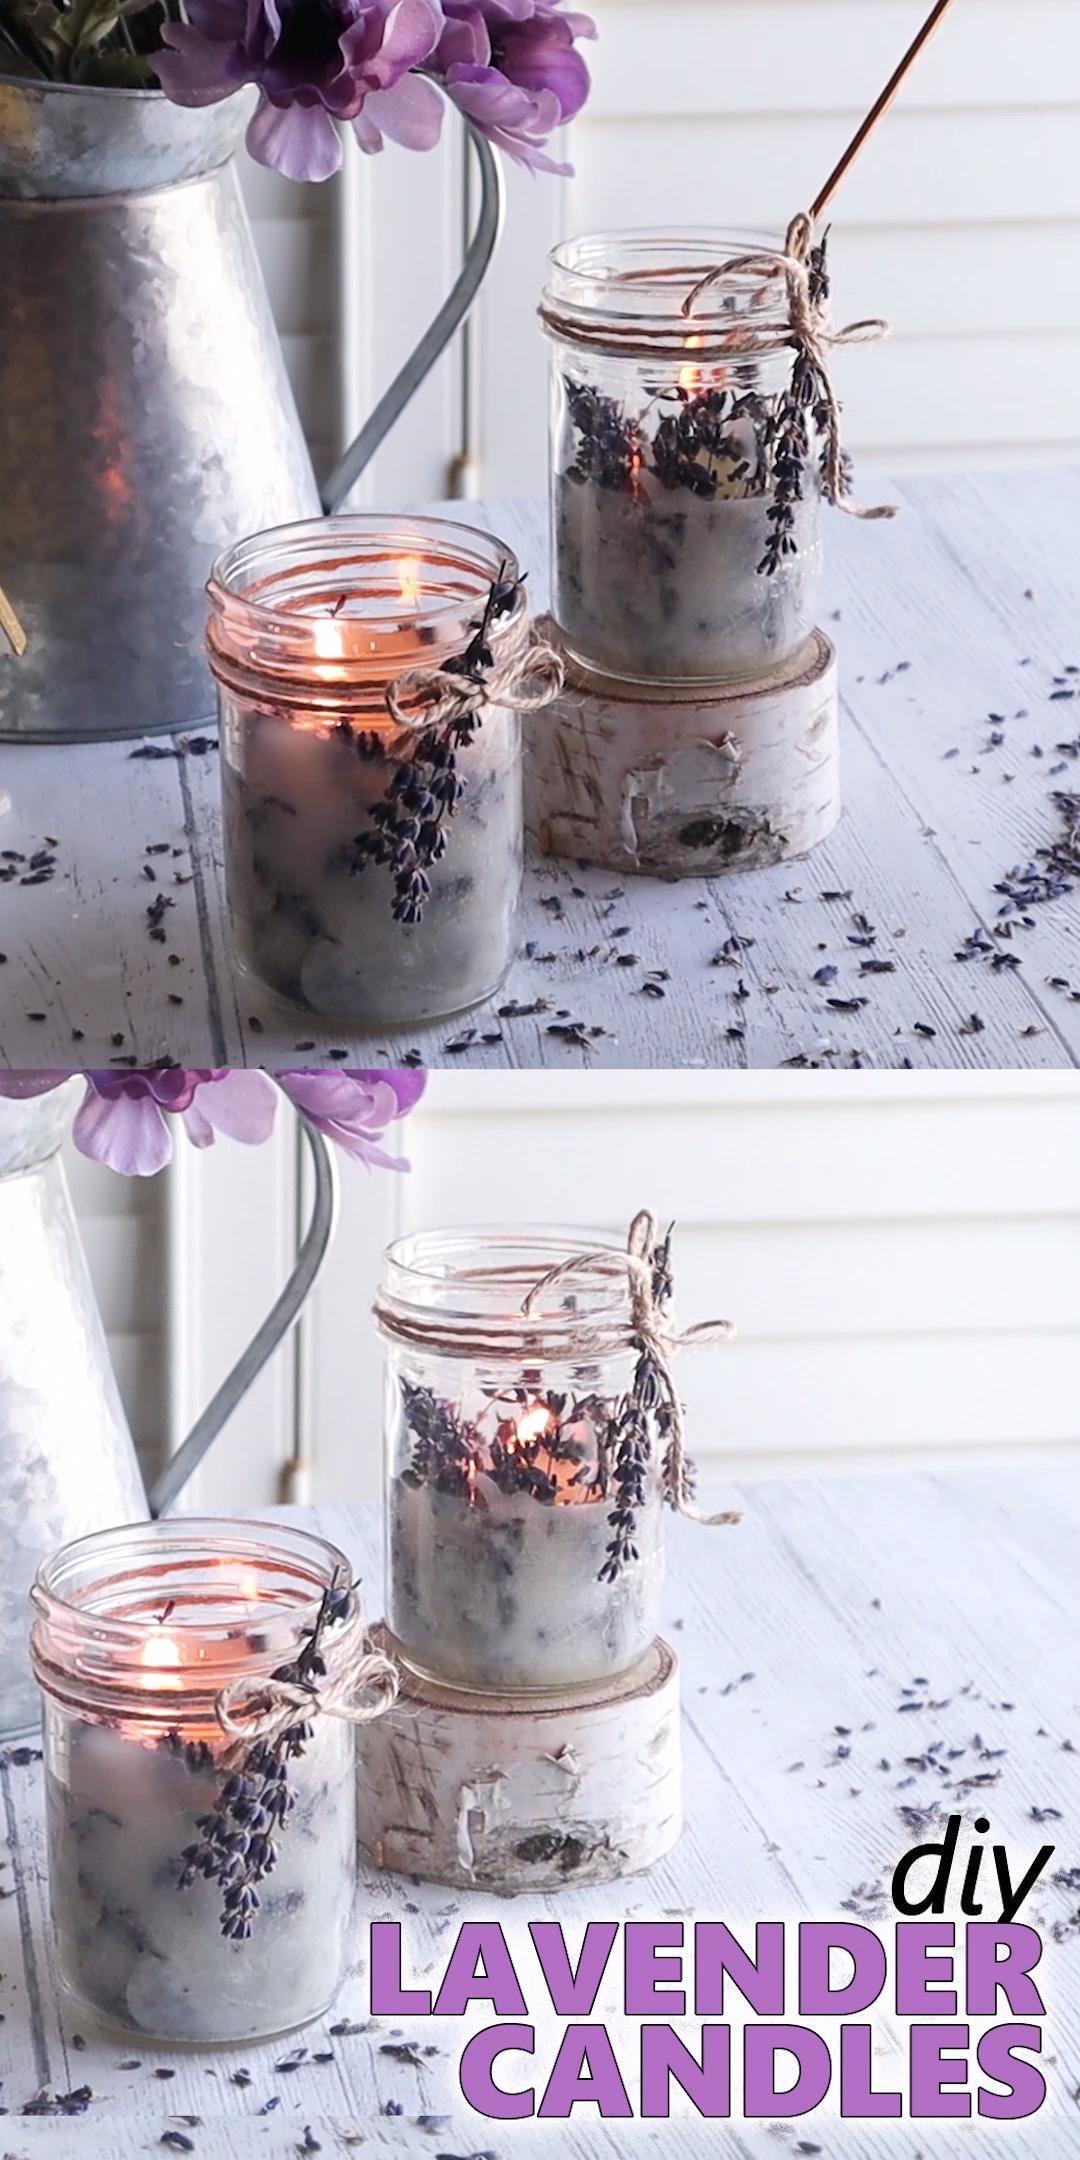 DIY Lavender Candles -   18 diy Candles gifts ideas